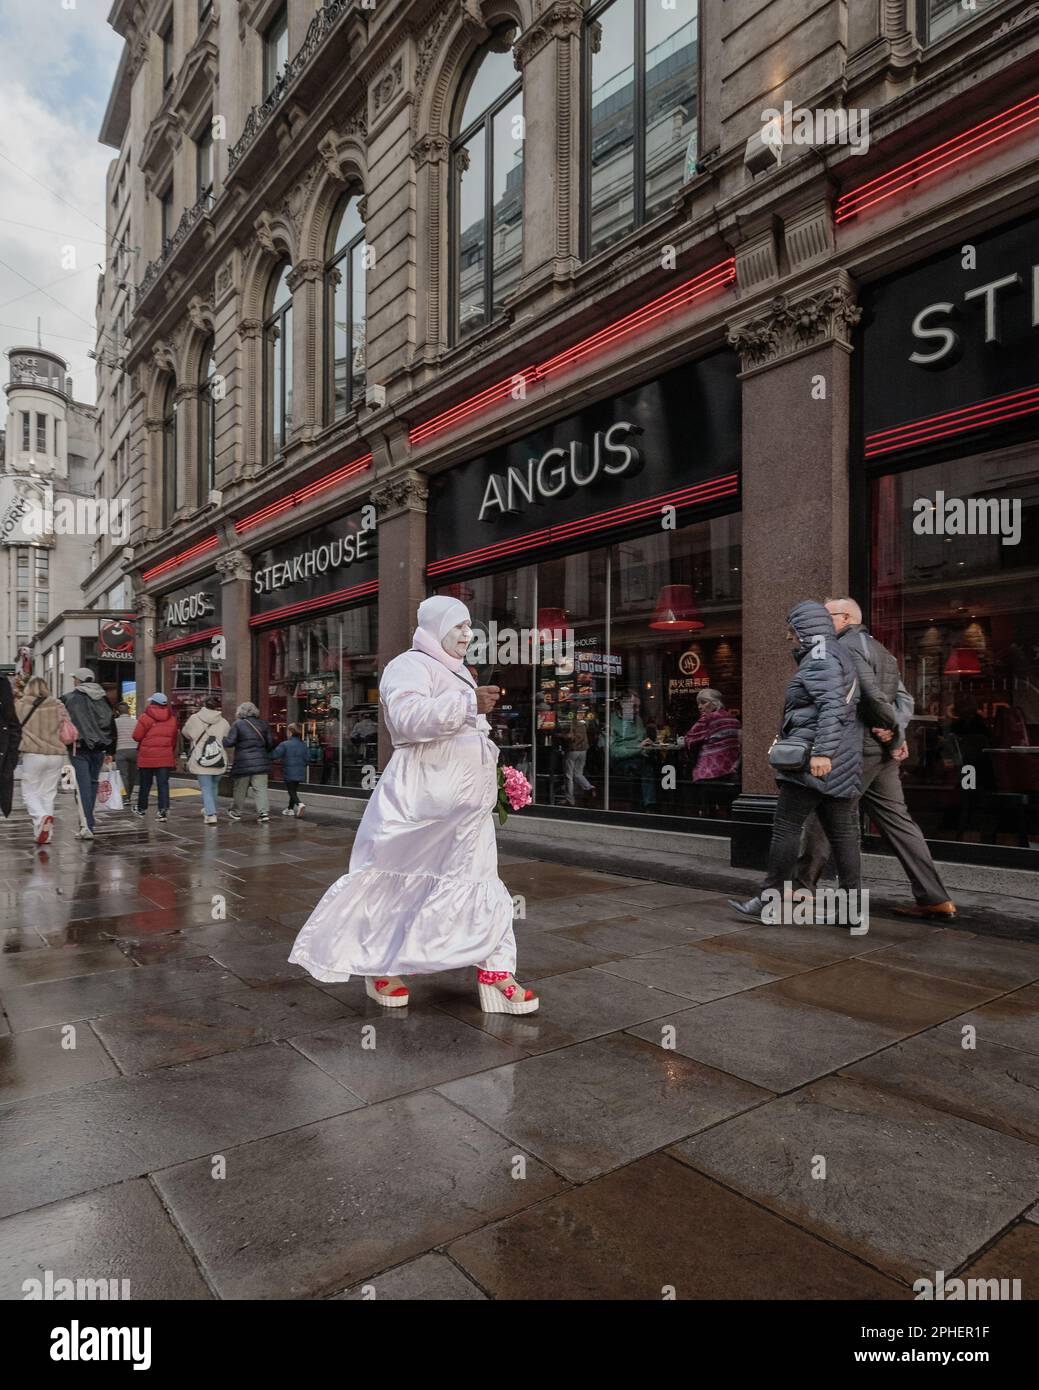 A ghost-like woman balloon-seller makes her way through central London. Stock Photo